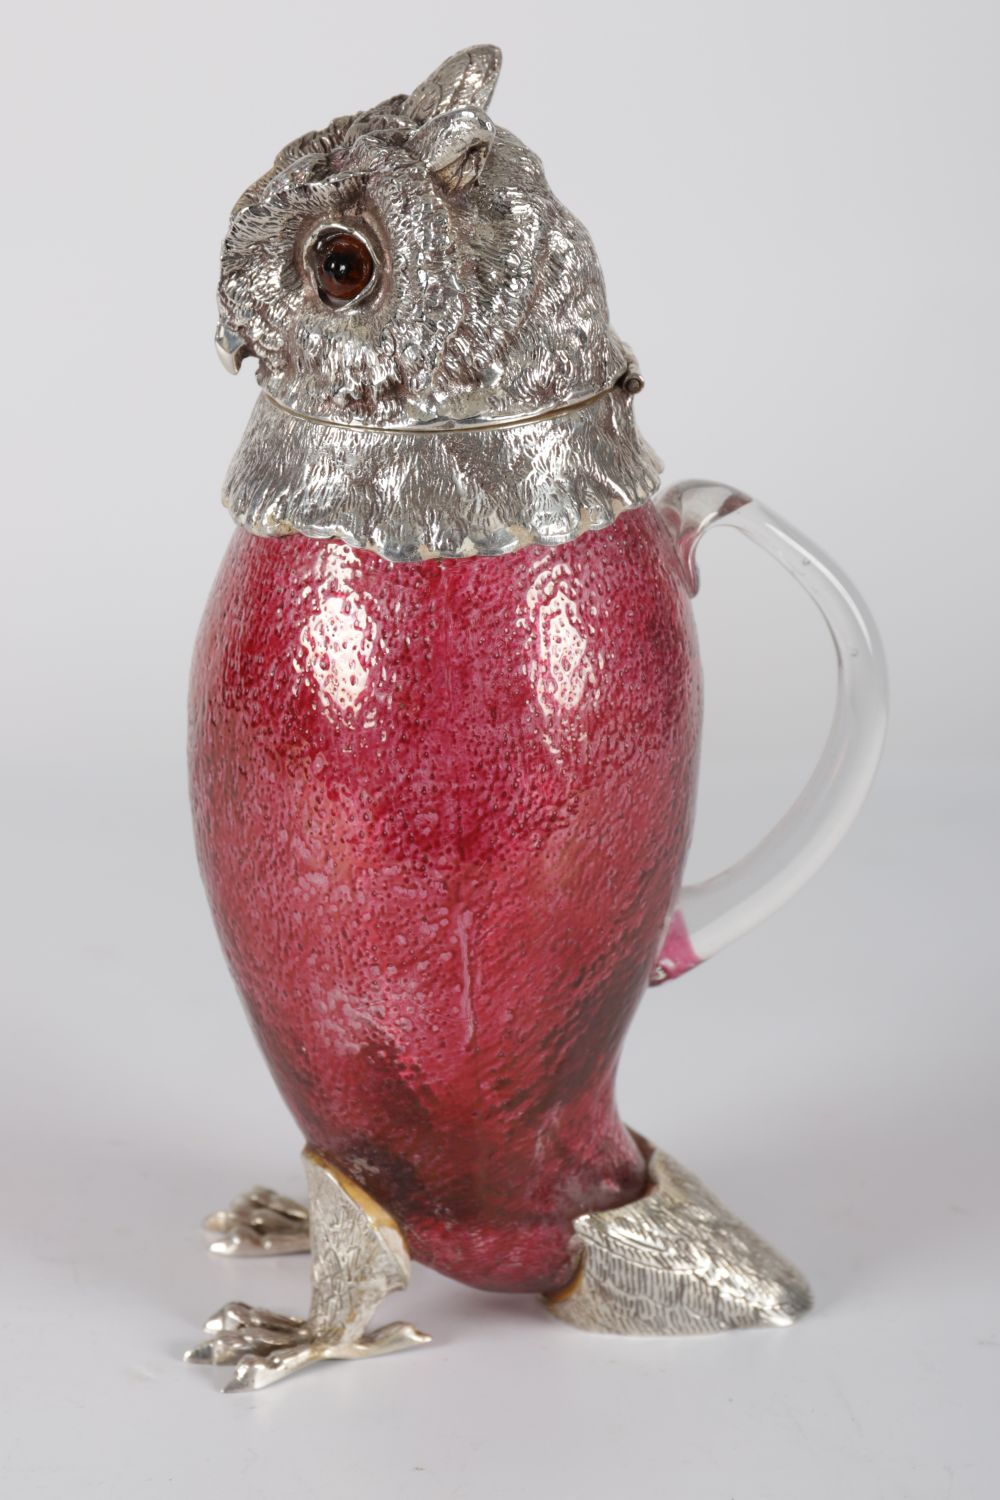 SILVER-PLATED RUBY GLASS CLARET JUG